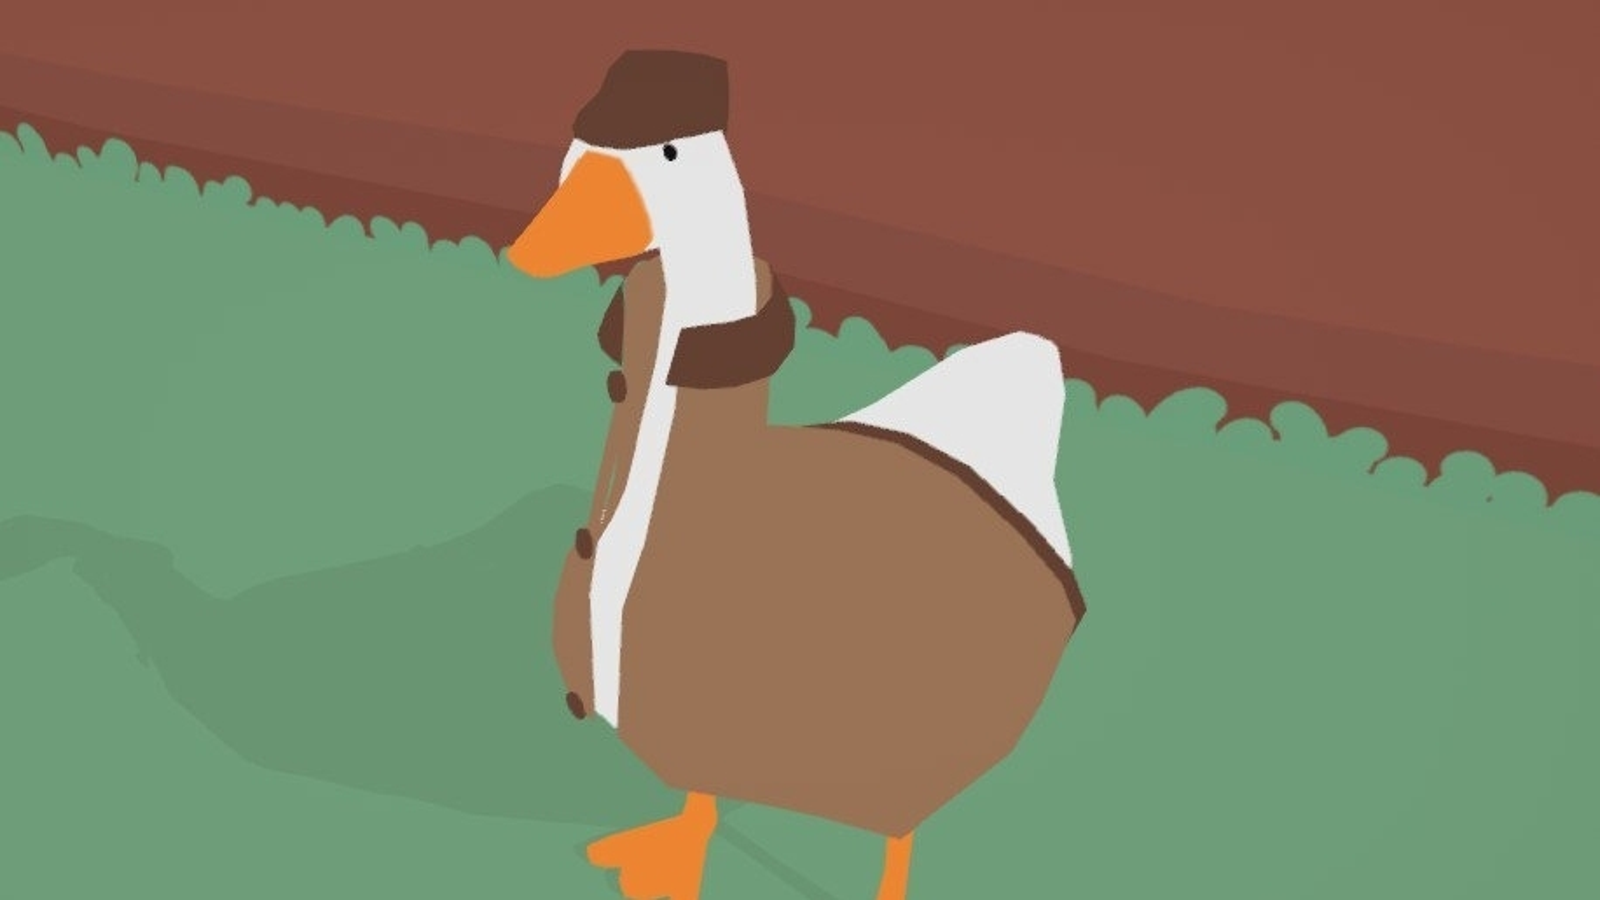 Untitled Goose, game, HD phone wallpaper